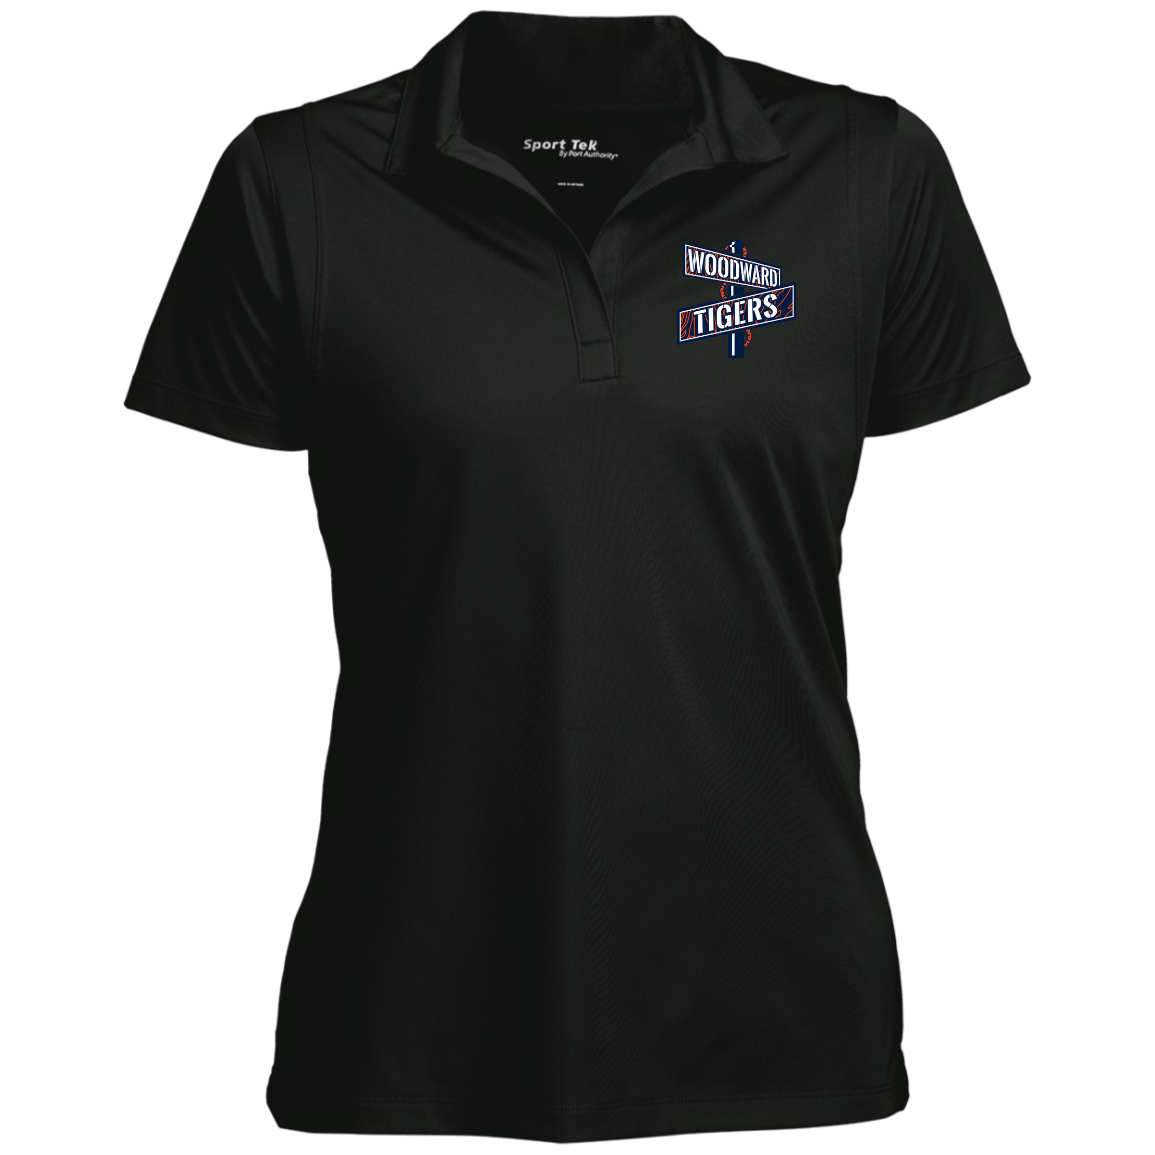 WOODWARD TIGERS Ladies' Micropique Sport-Wick® Polo